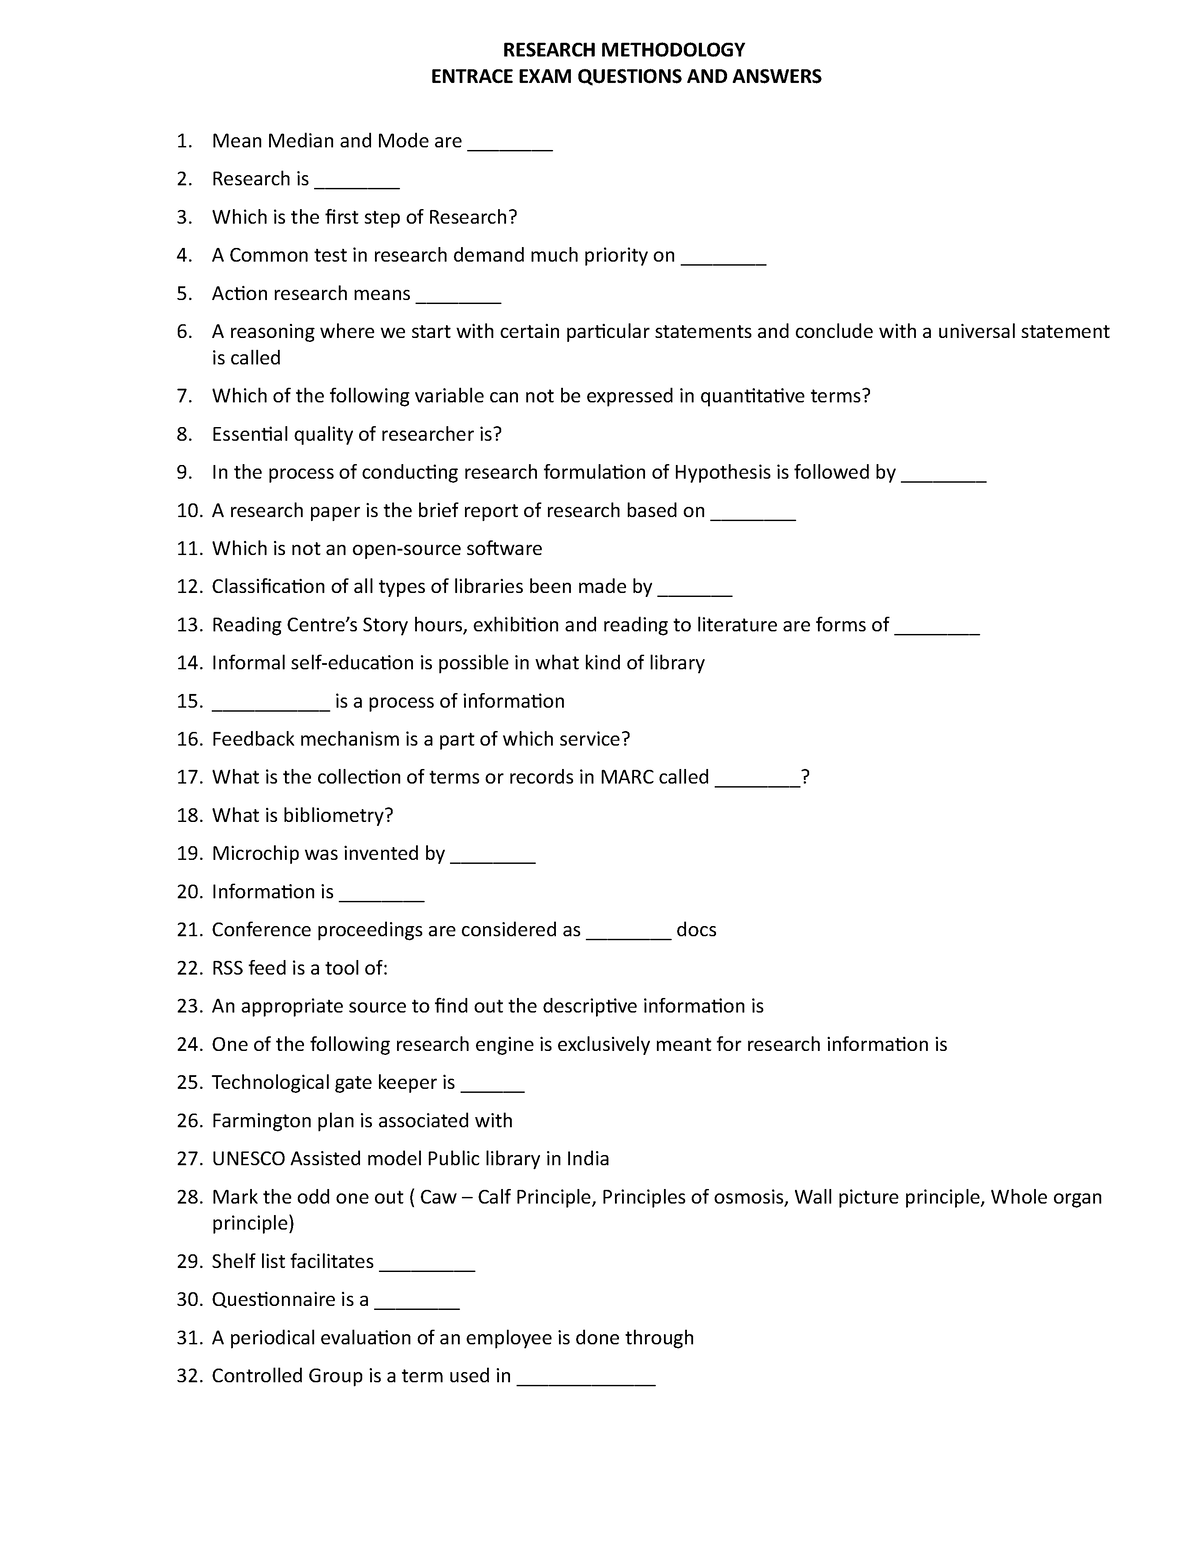 research methodology test questions and answers